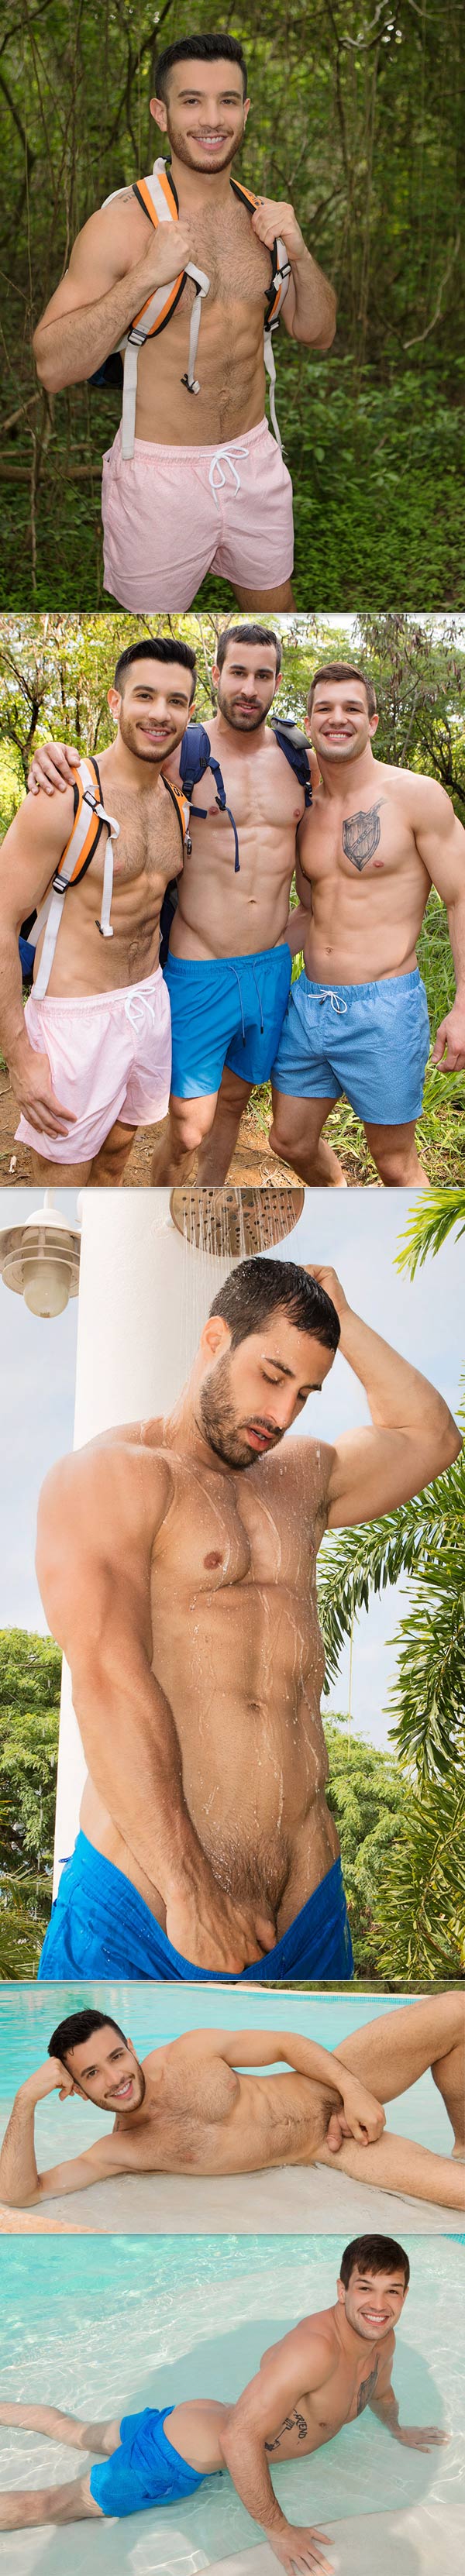 Sean Cody's Puerto Rican Getaway: DAY TWO (with Brysen, Randy & Manny) at SeanCody